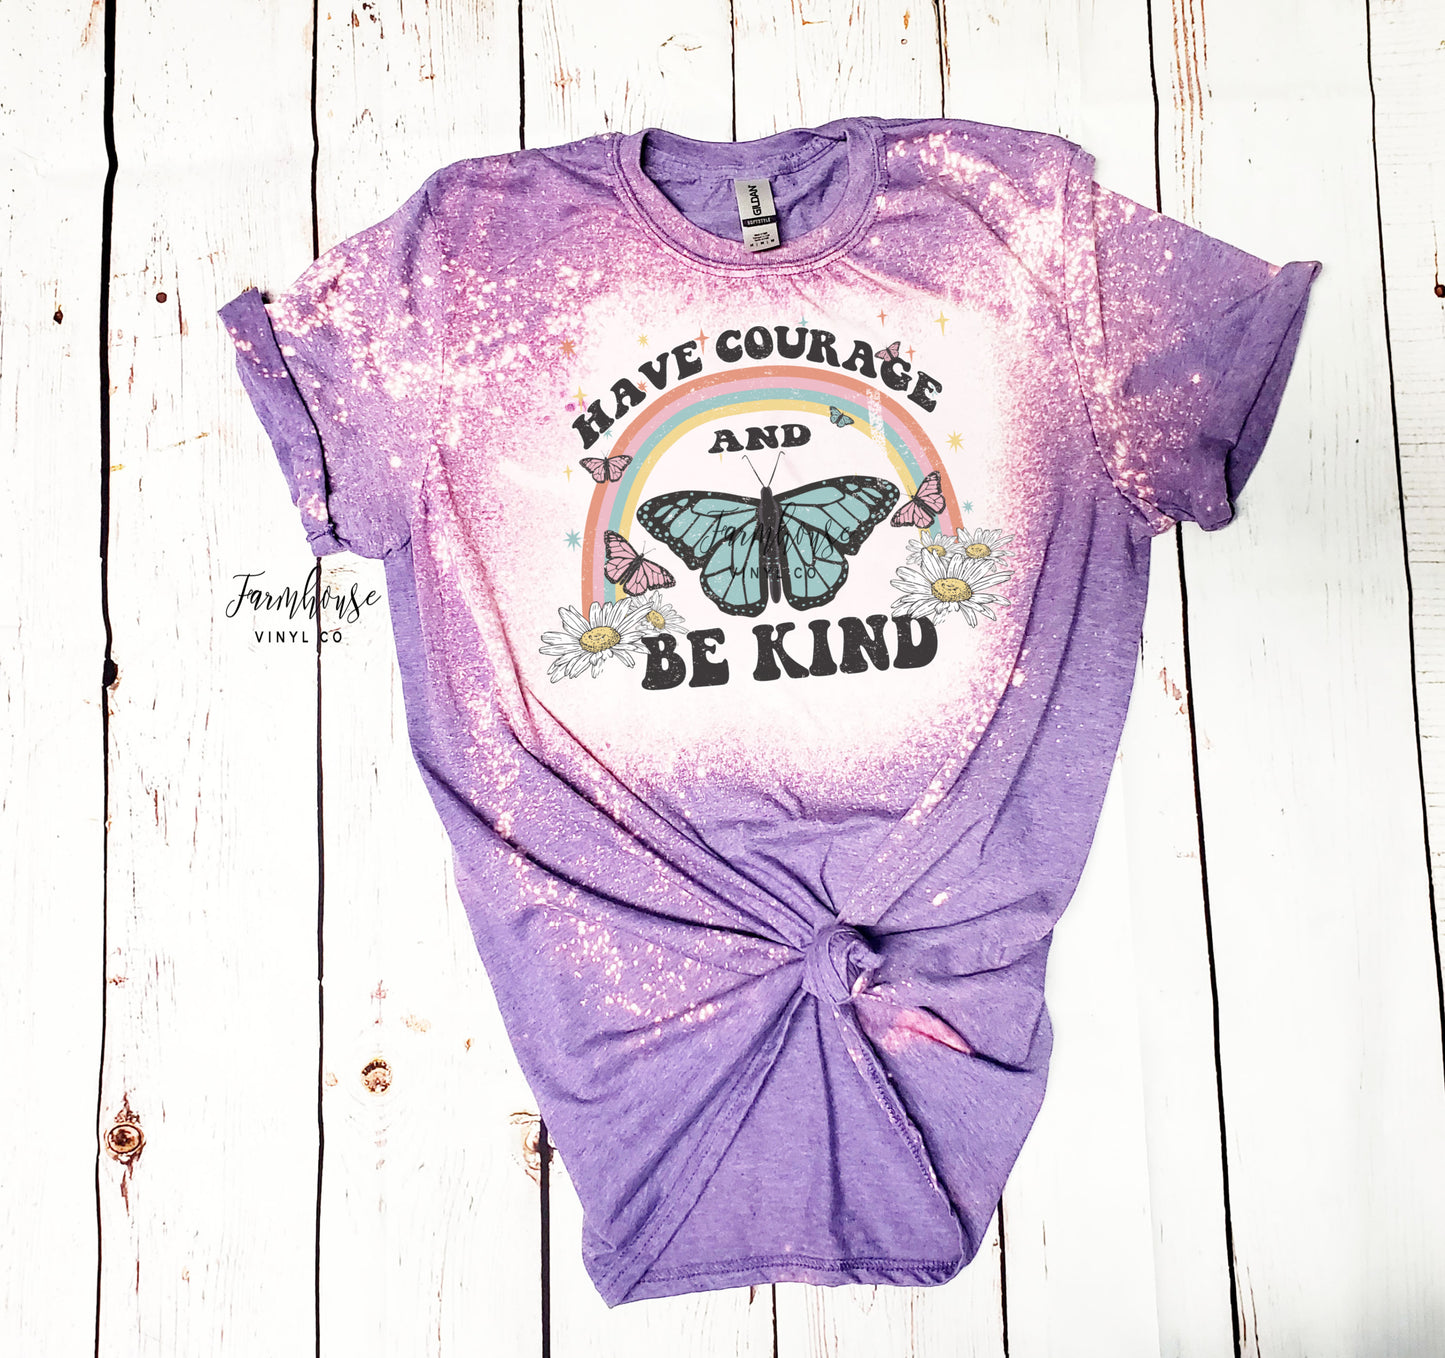 Have Courage and Be Kind Rainbow and Butterfly Bleached Shirt - Farmhouse Vinyl Co